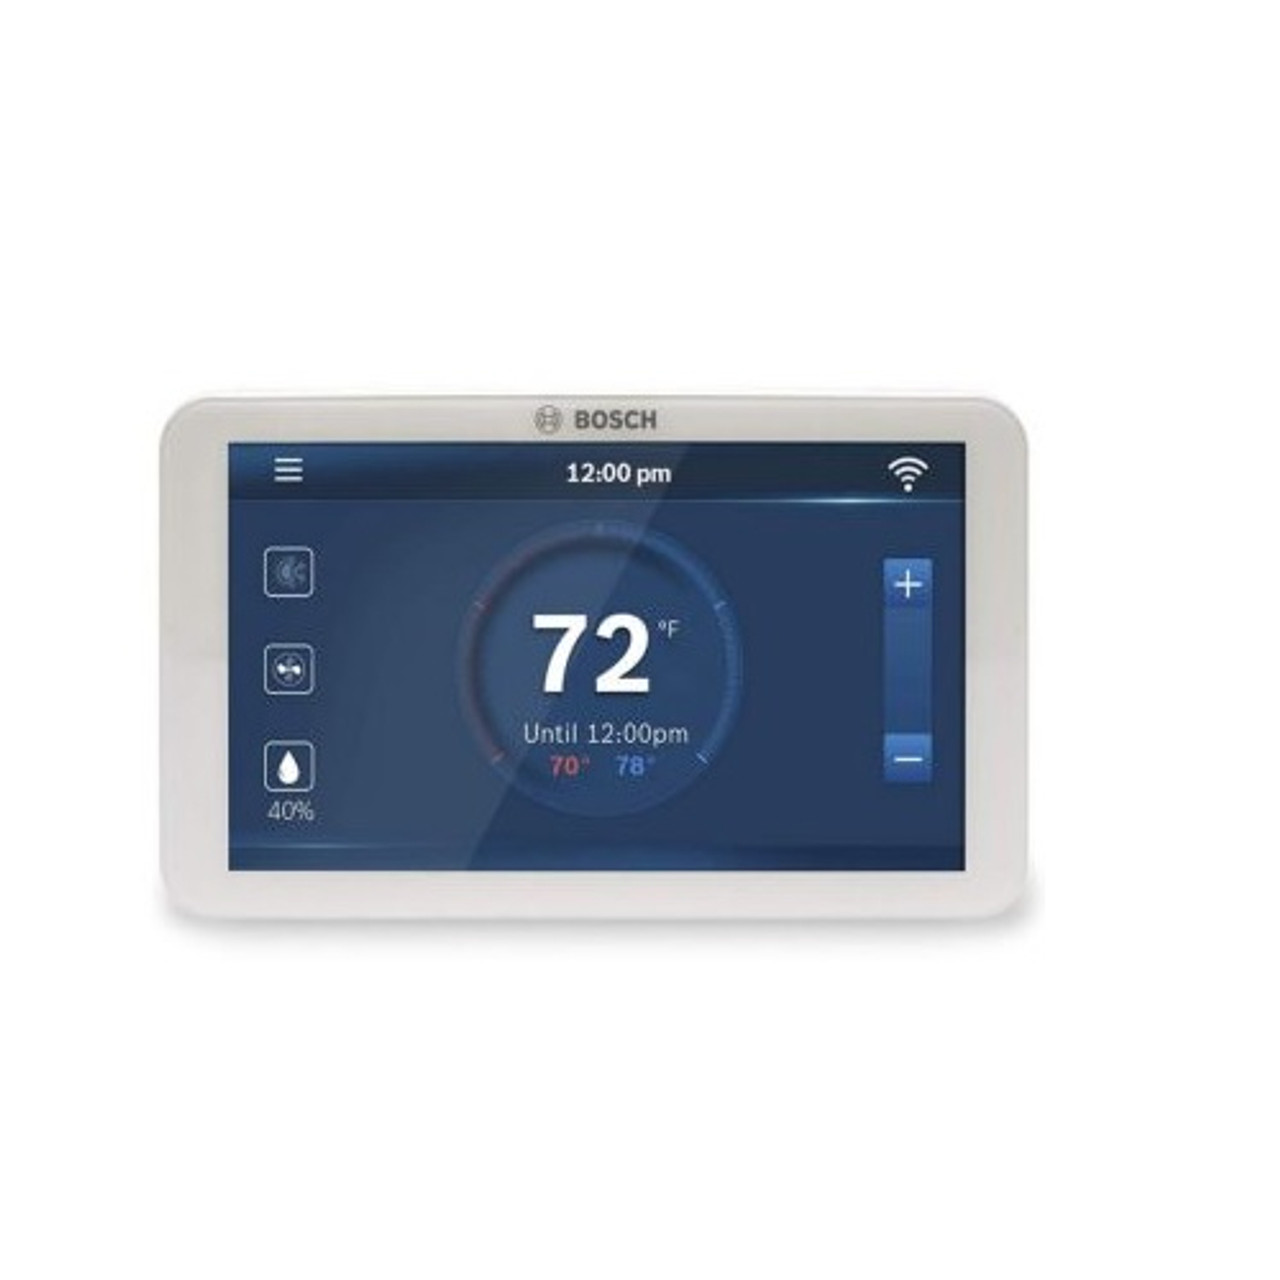 Bosch 8-733-948-009 Connected Control BCC100 Wi-Fi Thermostat